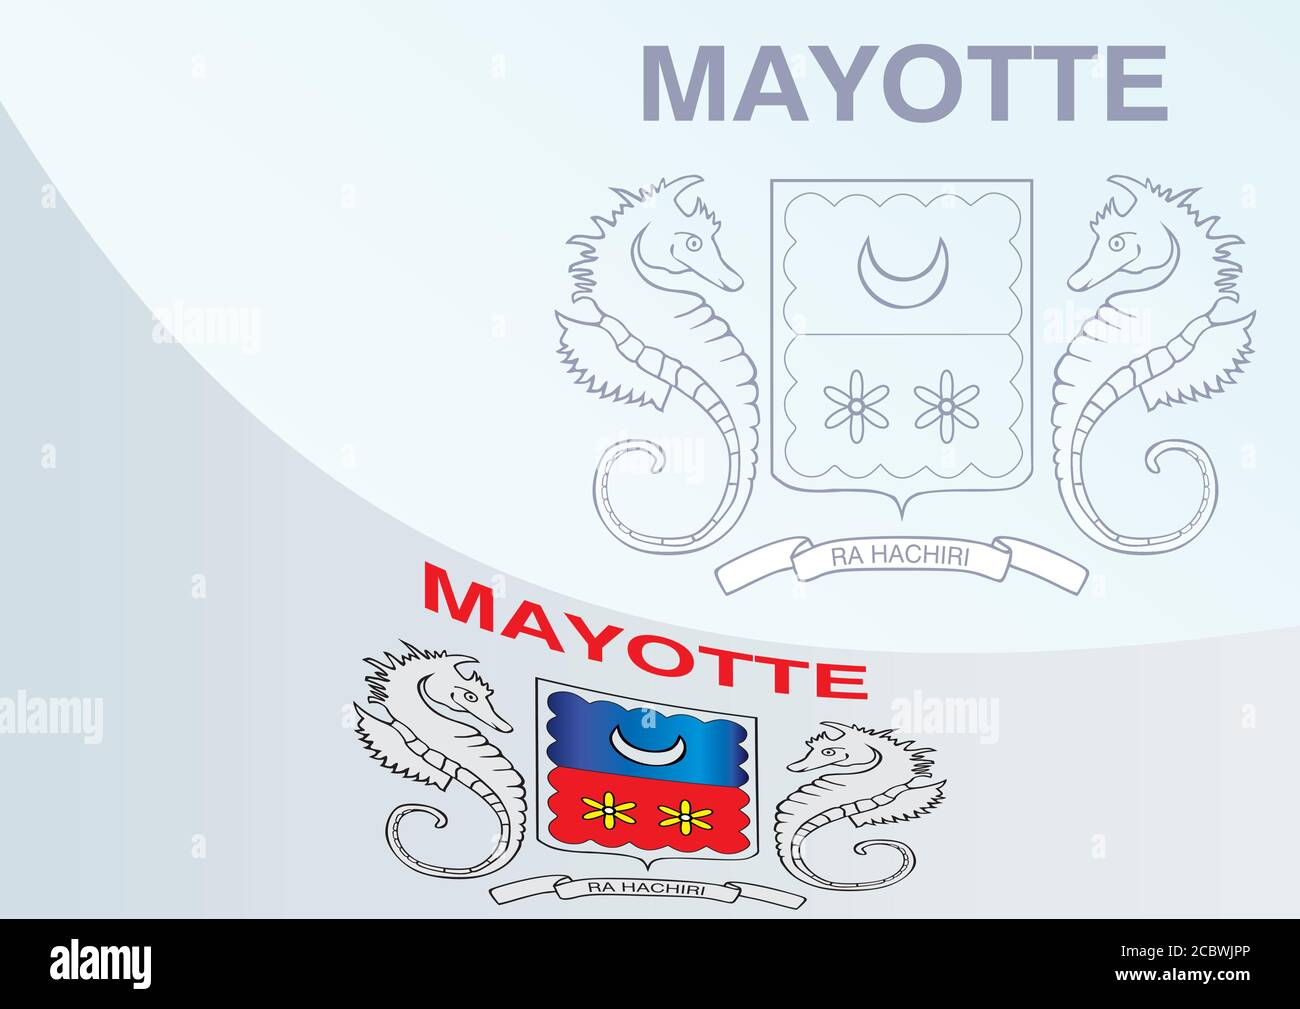 https://c8.alamy.com/comp/2CBWJPP/flag-and-coat-of-arms-of-mayotte-template-for-the-award-an-official-document-with-the-flag-and-coat-of-arms-of-mayotte-2CBWJPP.jpg